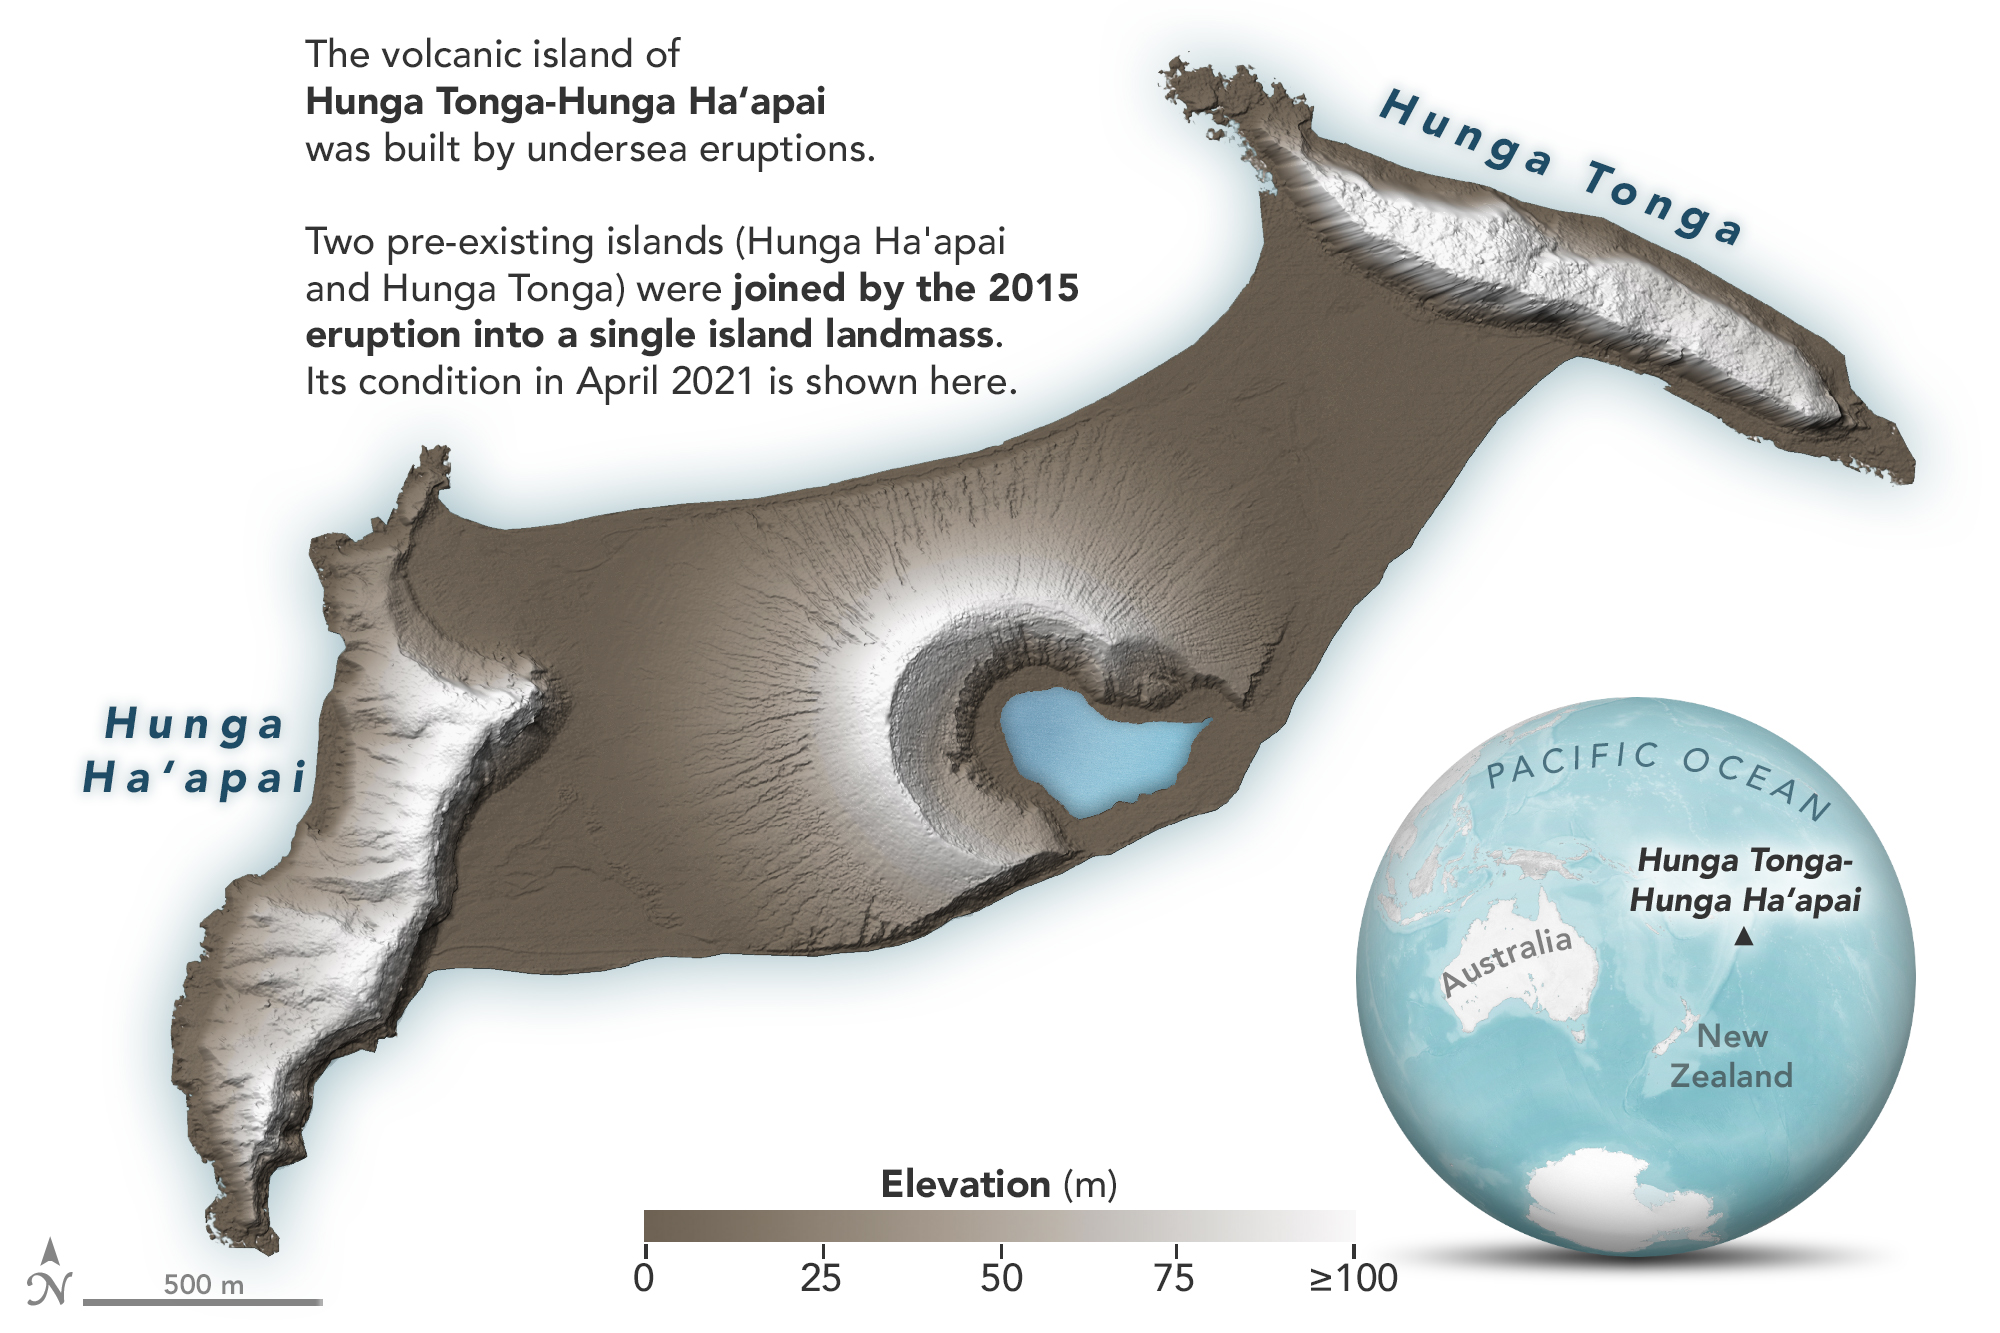 Hunga Tonga- Hunga Ha'apai April 10, 2021 - The volcanic island of Hunga Tonga-Hunga Ha'apai formed when two pre-existing islands were joinged by a volcanic eruption in 2015.